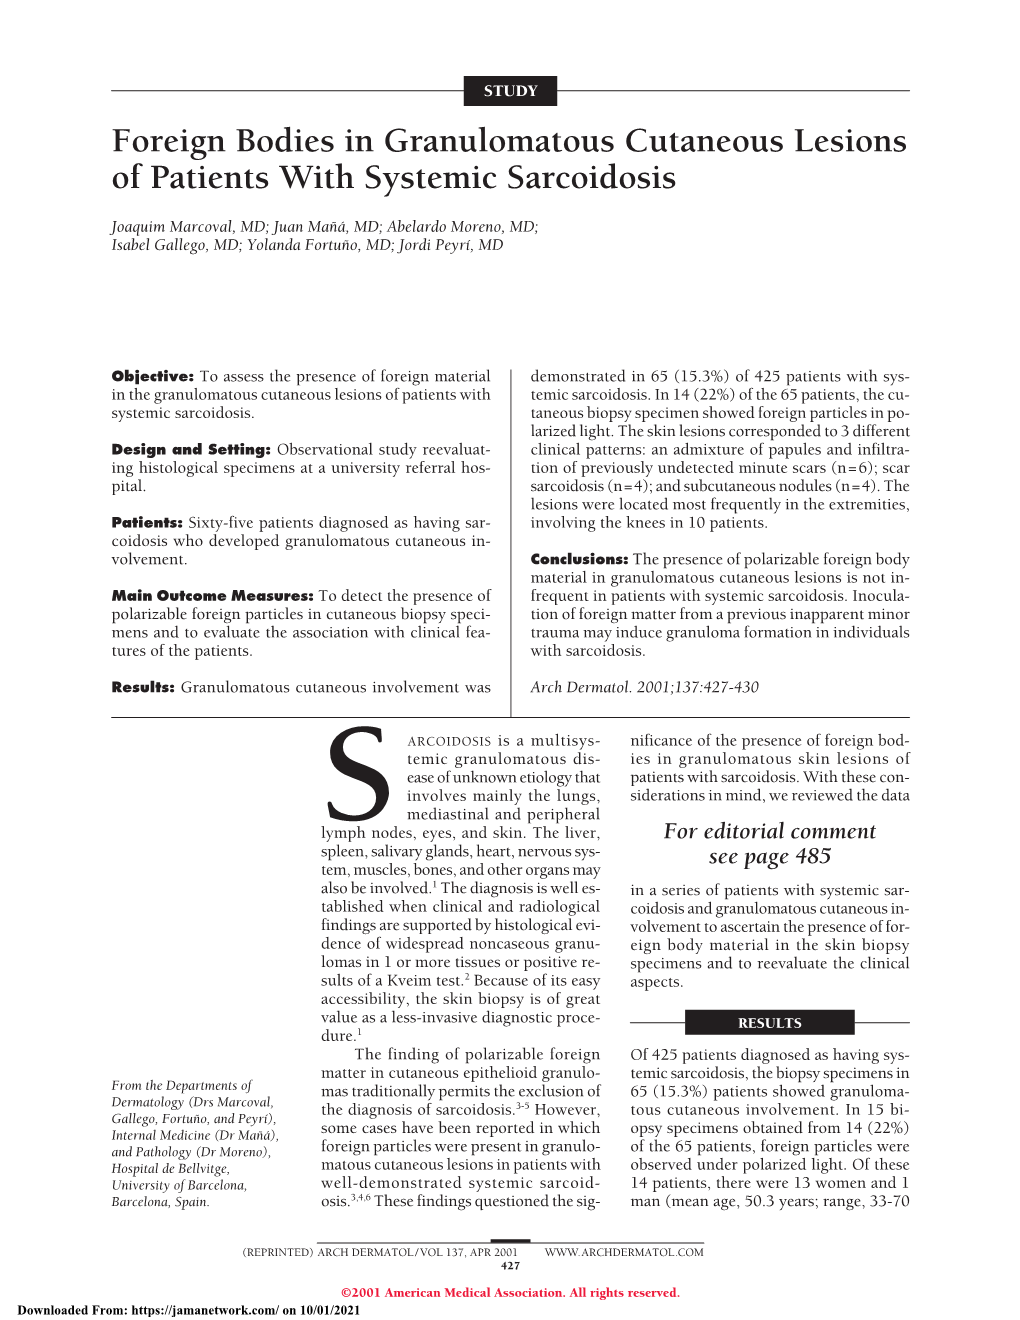 Foreign Bodies in Granulomatous Cutaneous Lesions of Patients with Systemic Sarcoidosis